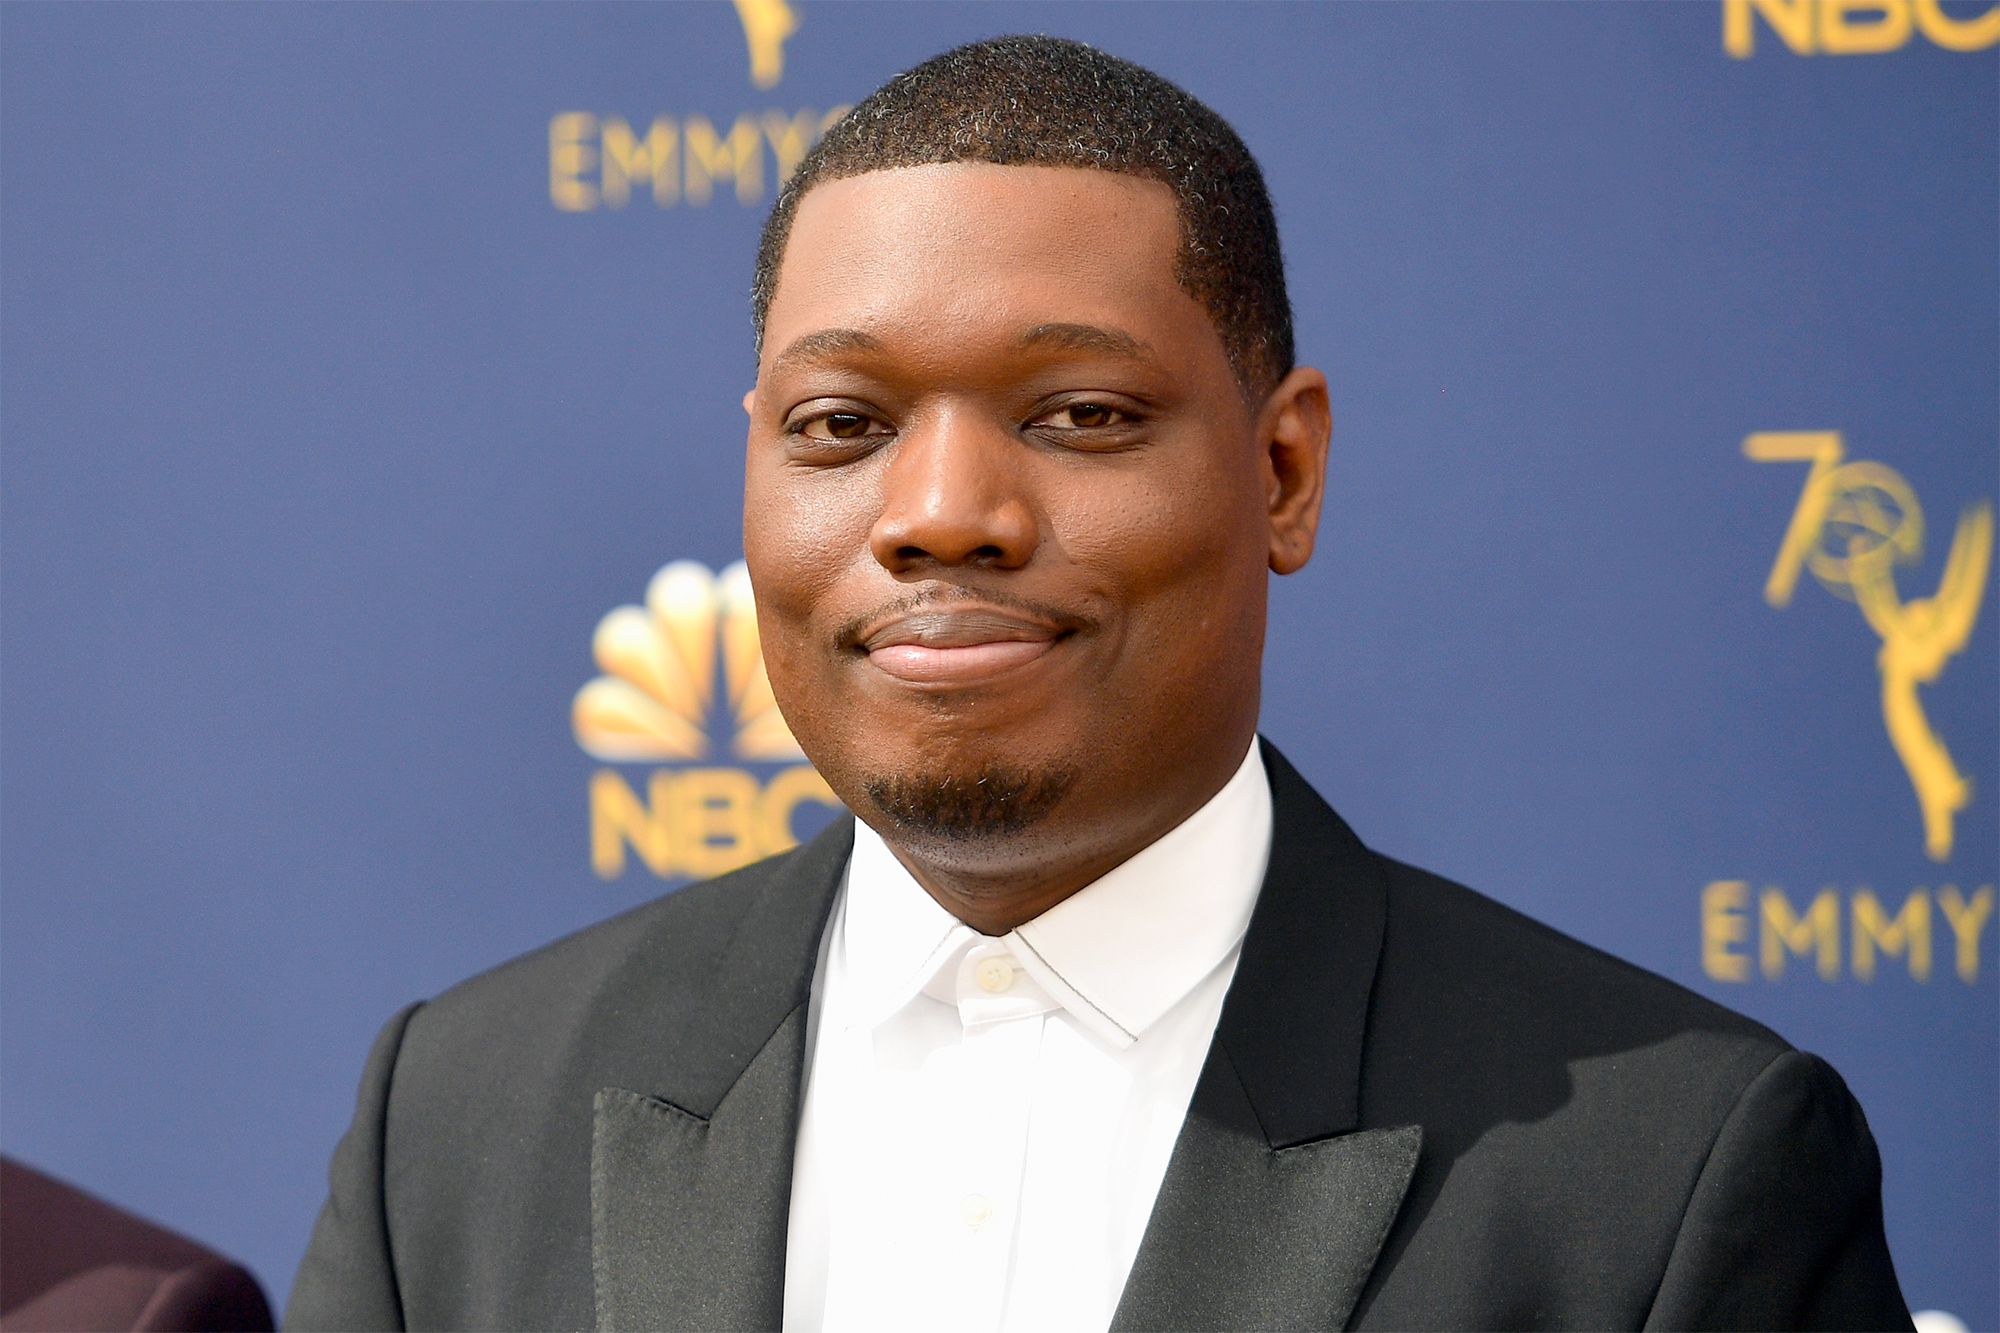 ‘SNL’s’ Michael Che Called Out For What Some Say is Anti-Semitic Joke